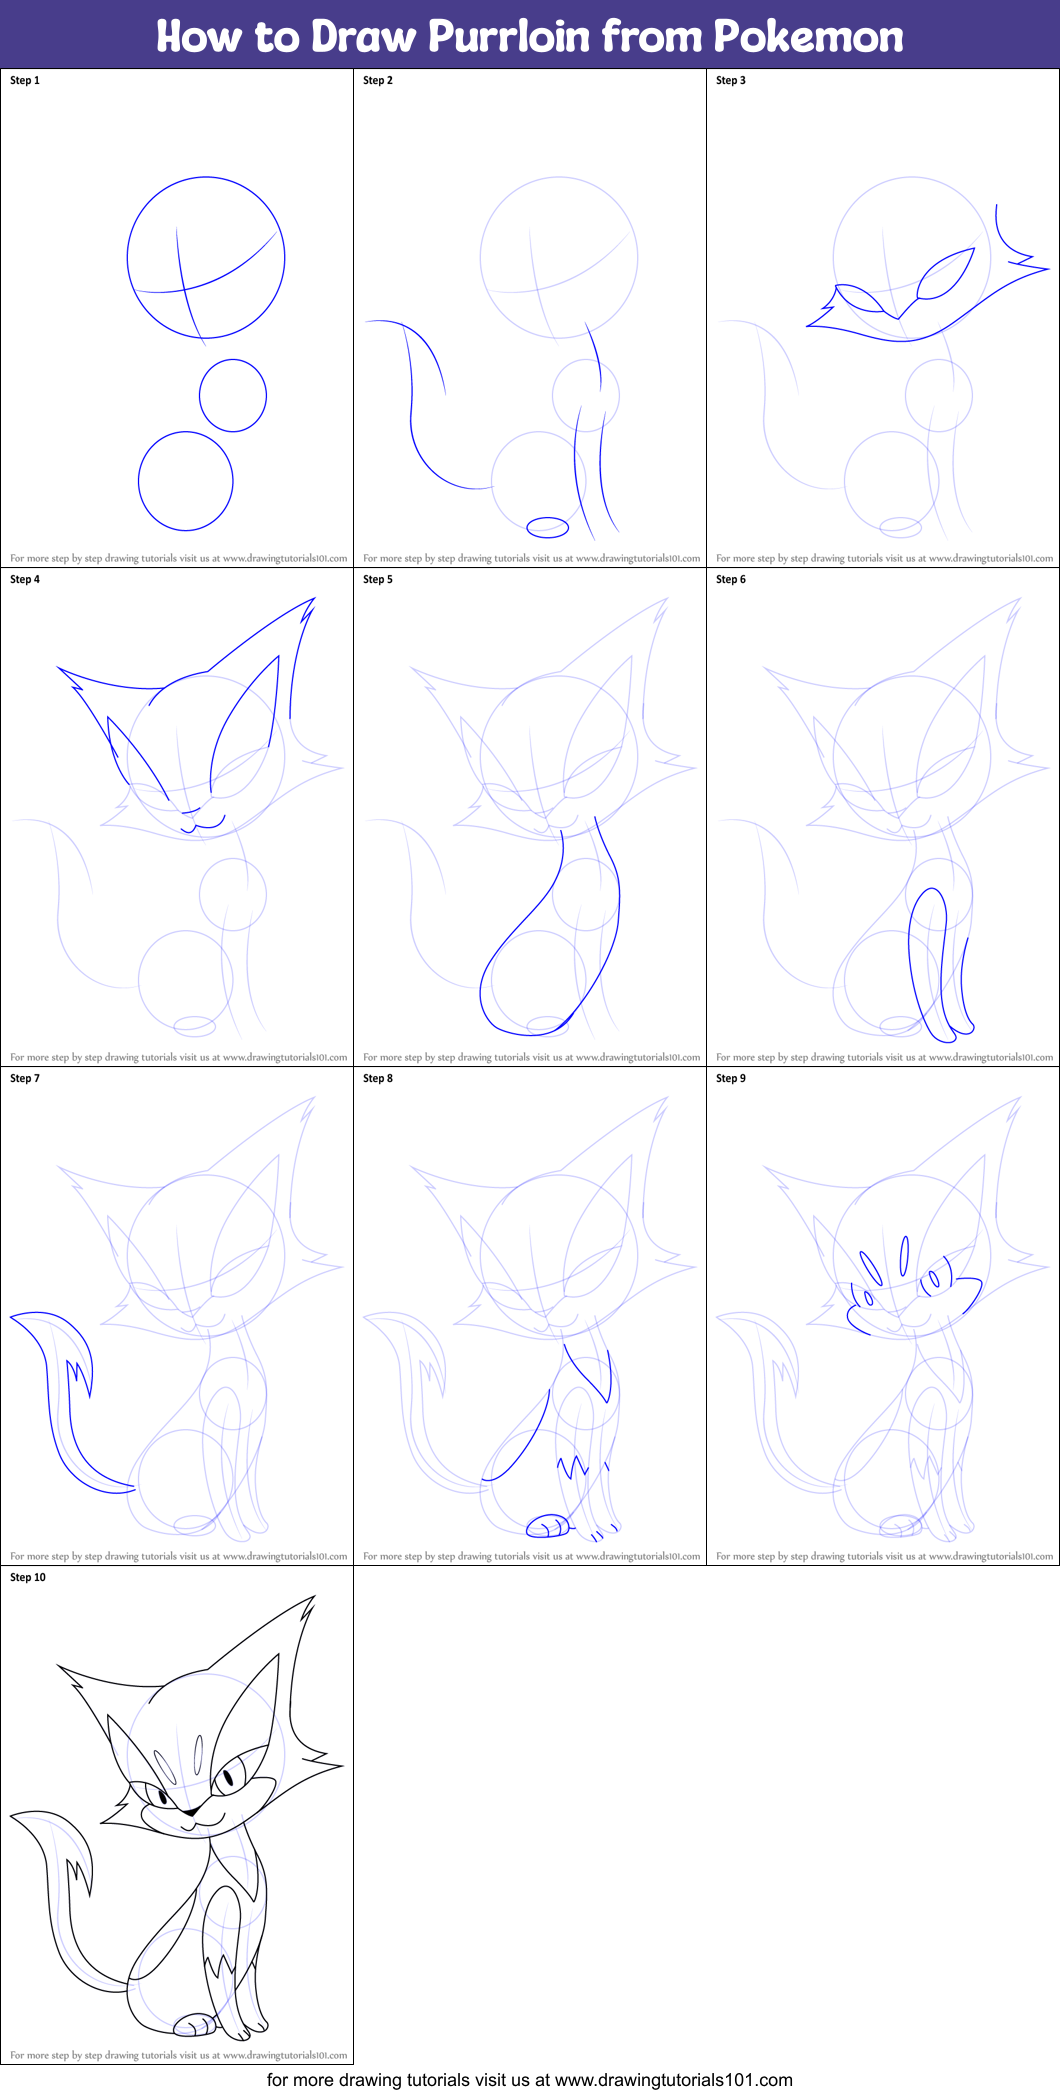 How to Draw Purrloin from Pokemon printable step by step drawing sheet